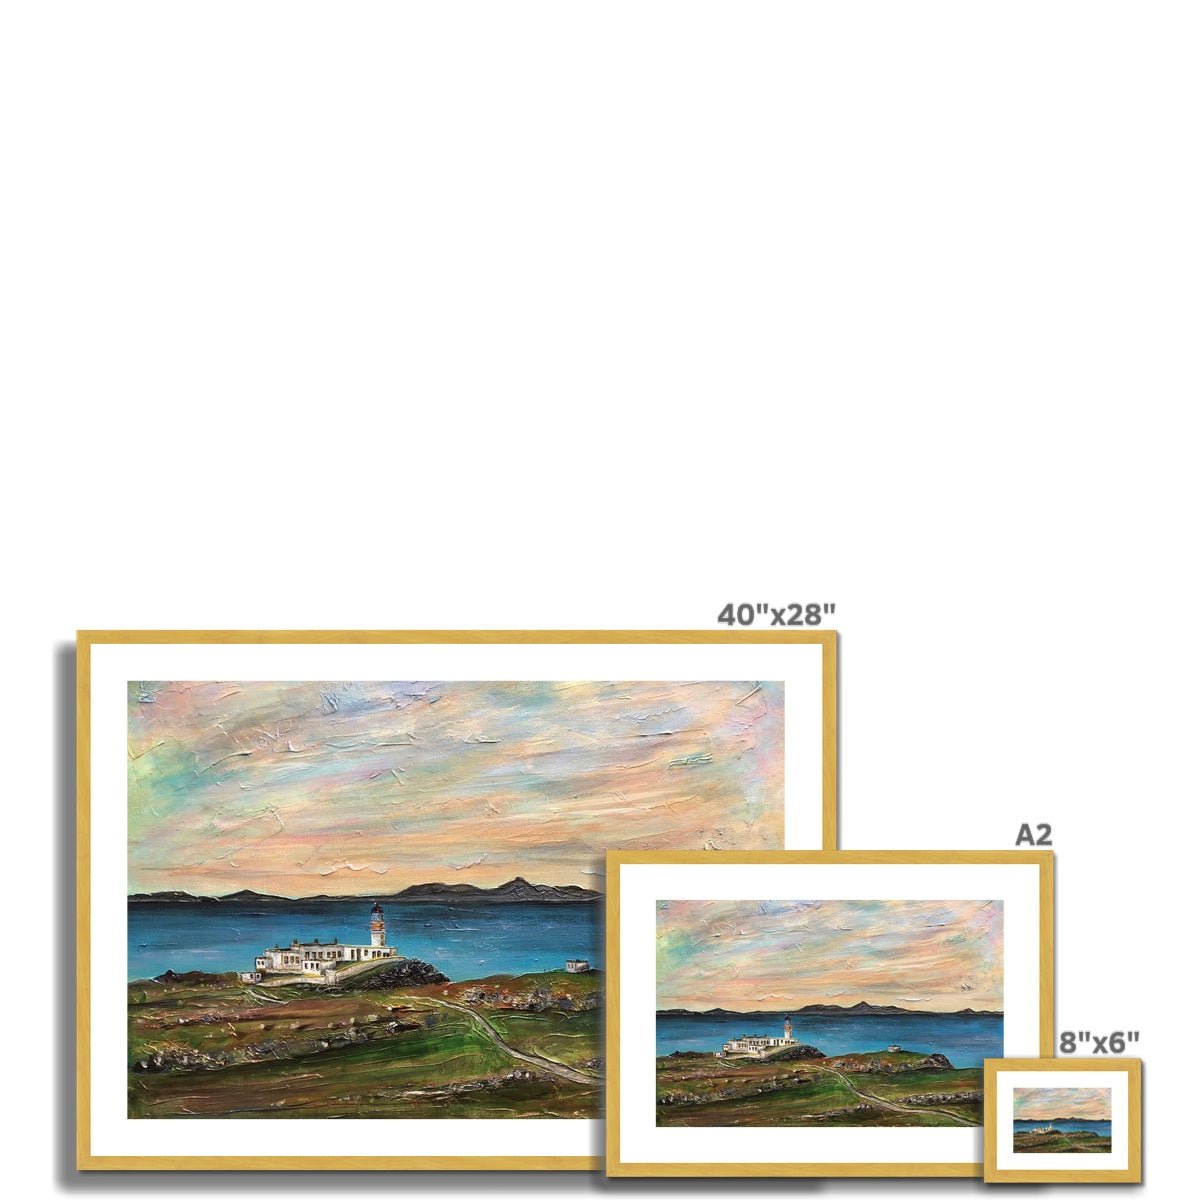 Neist Point Skye Painting | Antique Framed & Mounted Prints From Scotland-Antique Framed & Mounted Prints-Skye Art Gallery-Paintings, Prints, Homeware, Art Gifts From Scotland By Scottish Artist Kevin Hunter